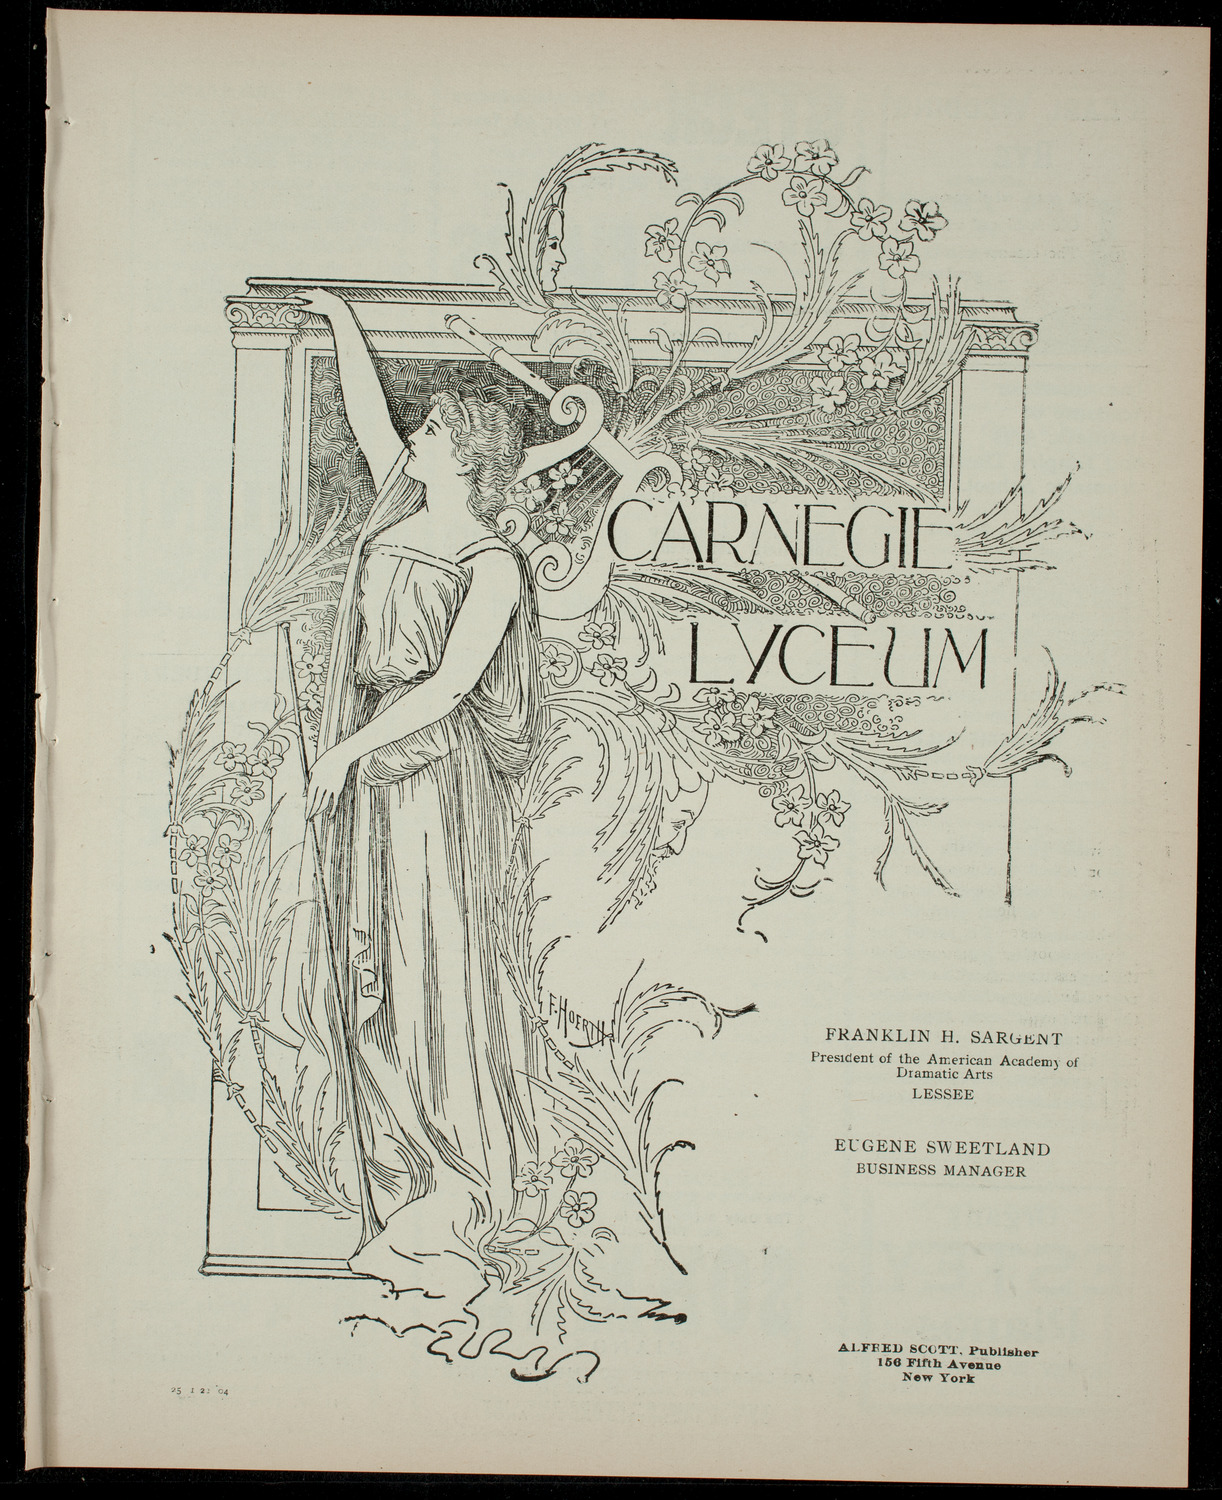 Academy Stock Company of the American Academy of Dramatic Arts/Empire Theatre Dramatic School, January 22, 1904, program page 1